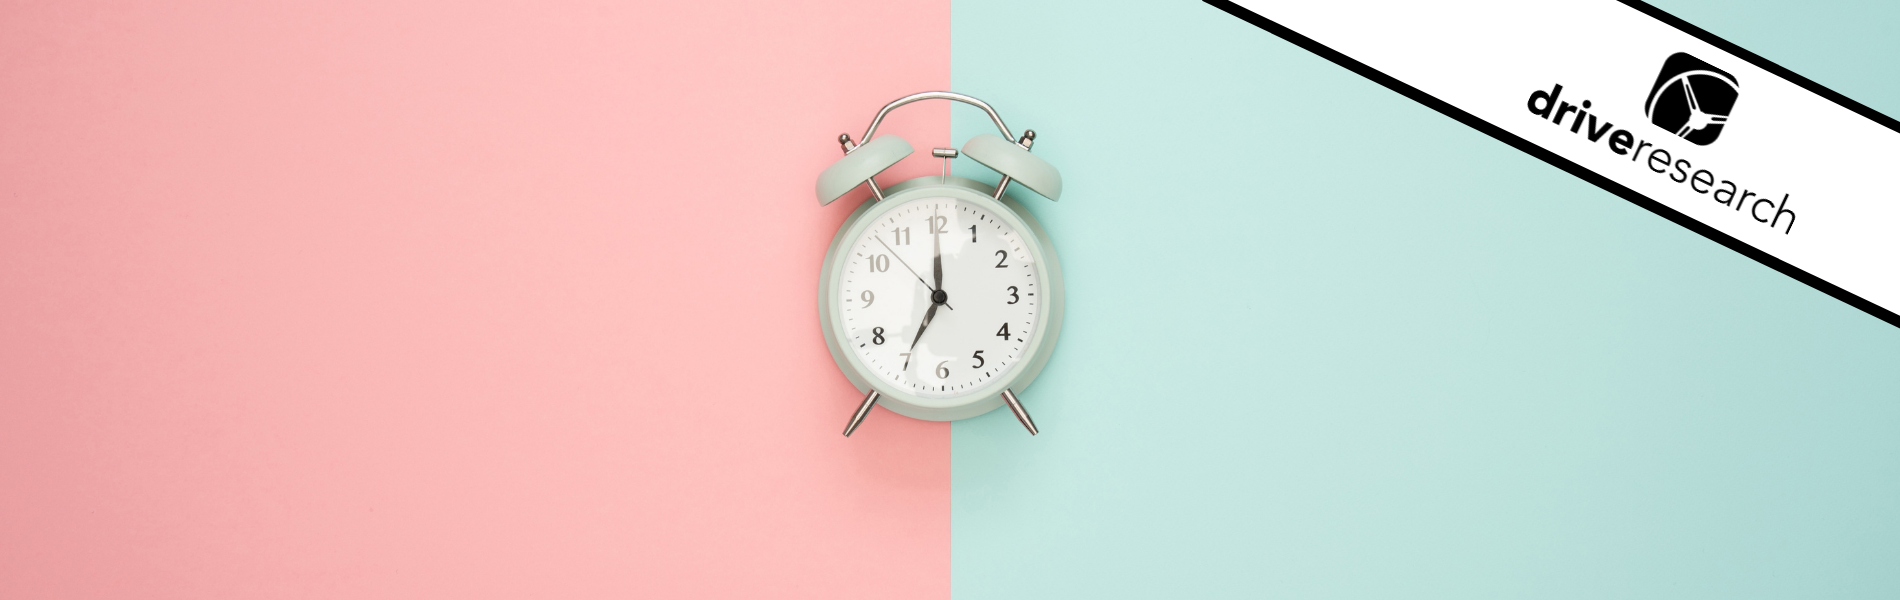 clock against a pink and blue background